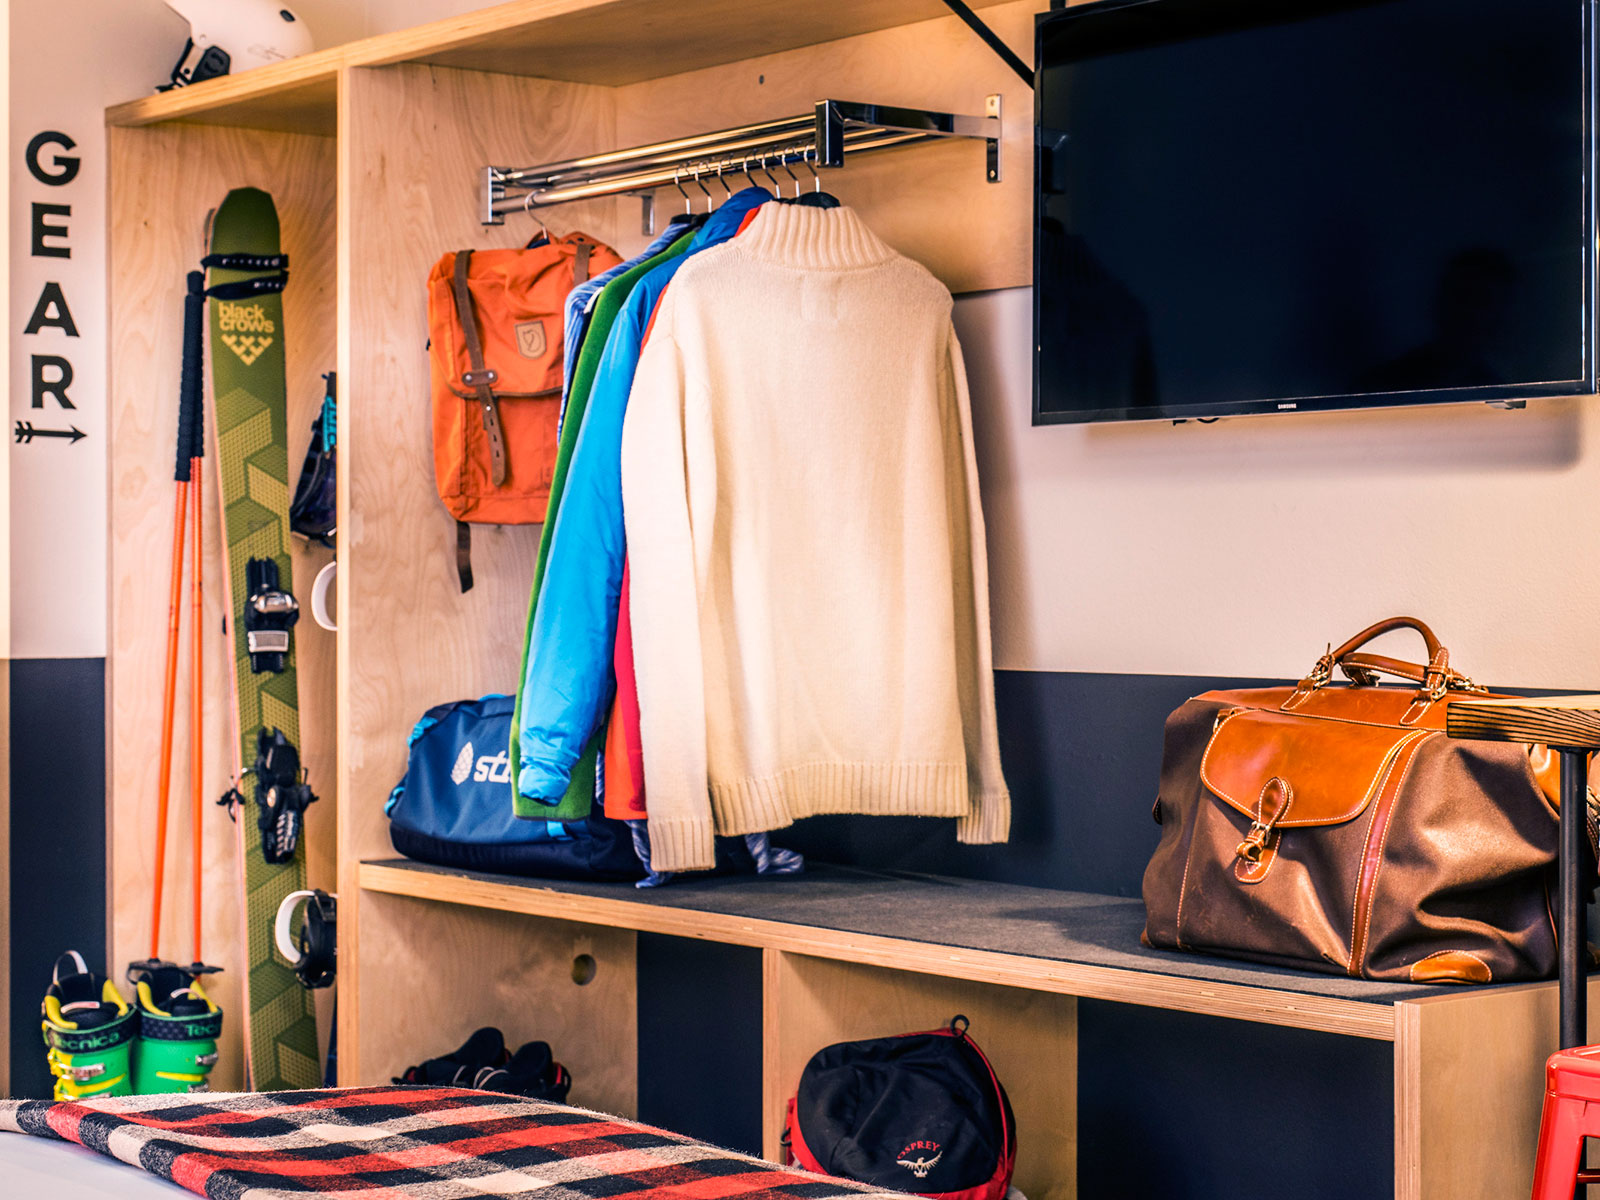 Mountain Modern Motel closet with hanging clothes and ski gear